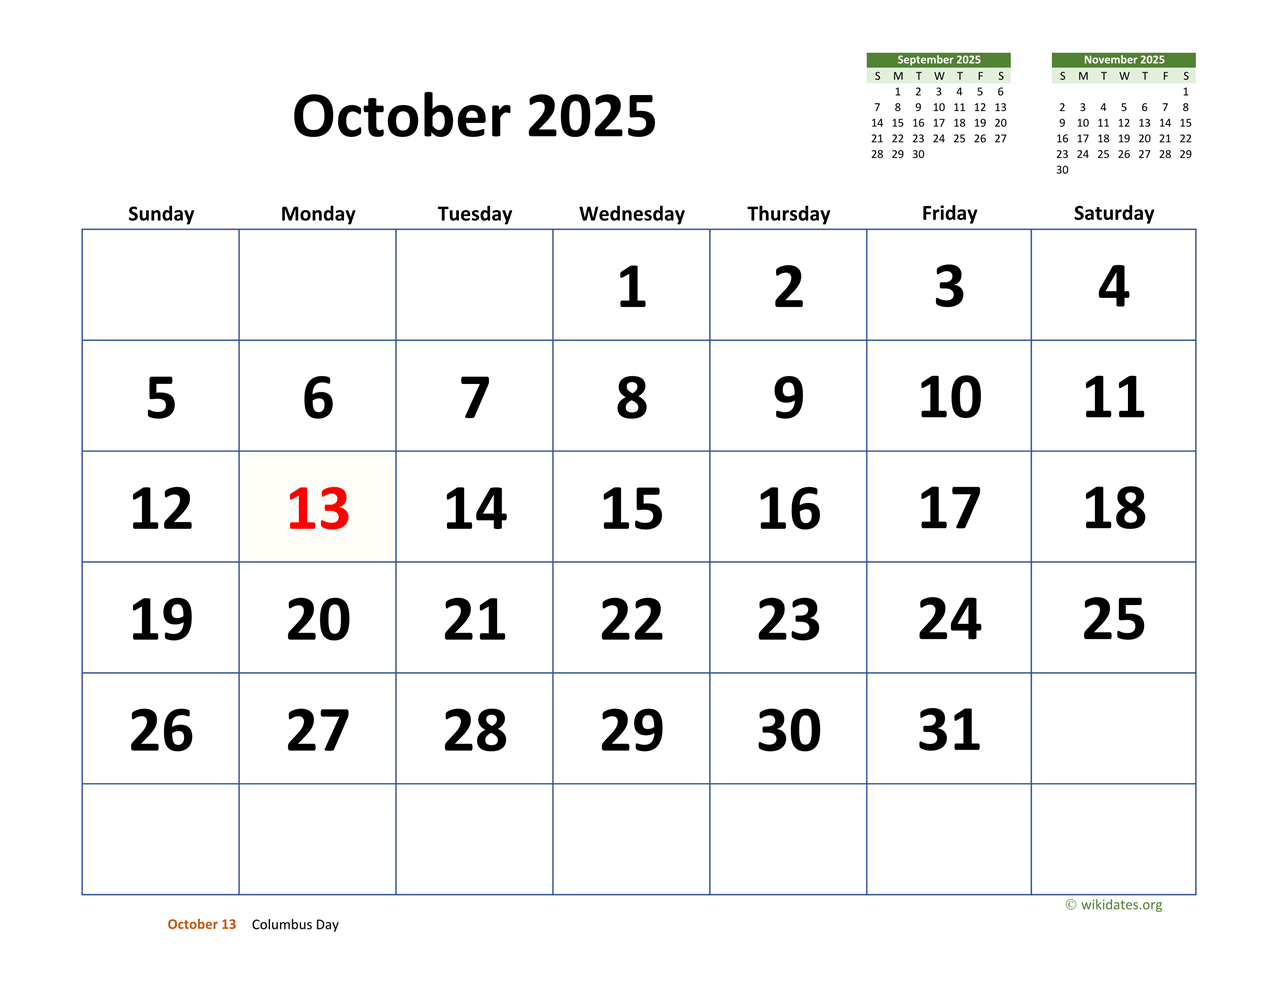 October 2025 Calendar with Extralarge Dates